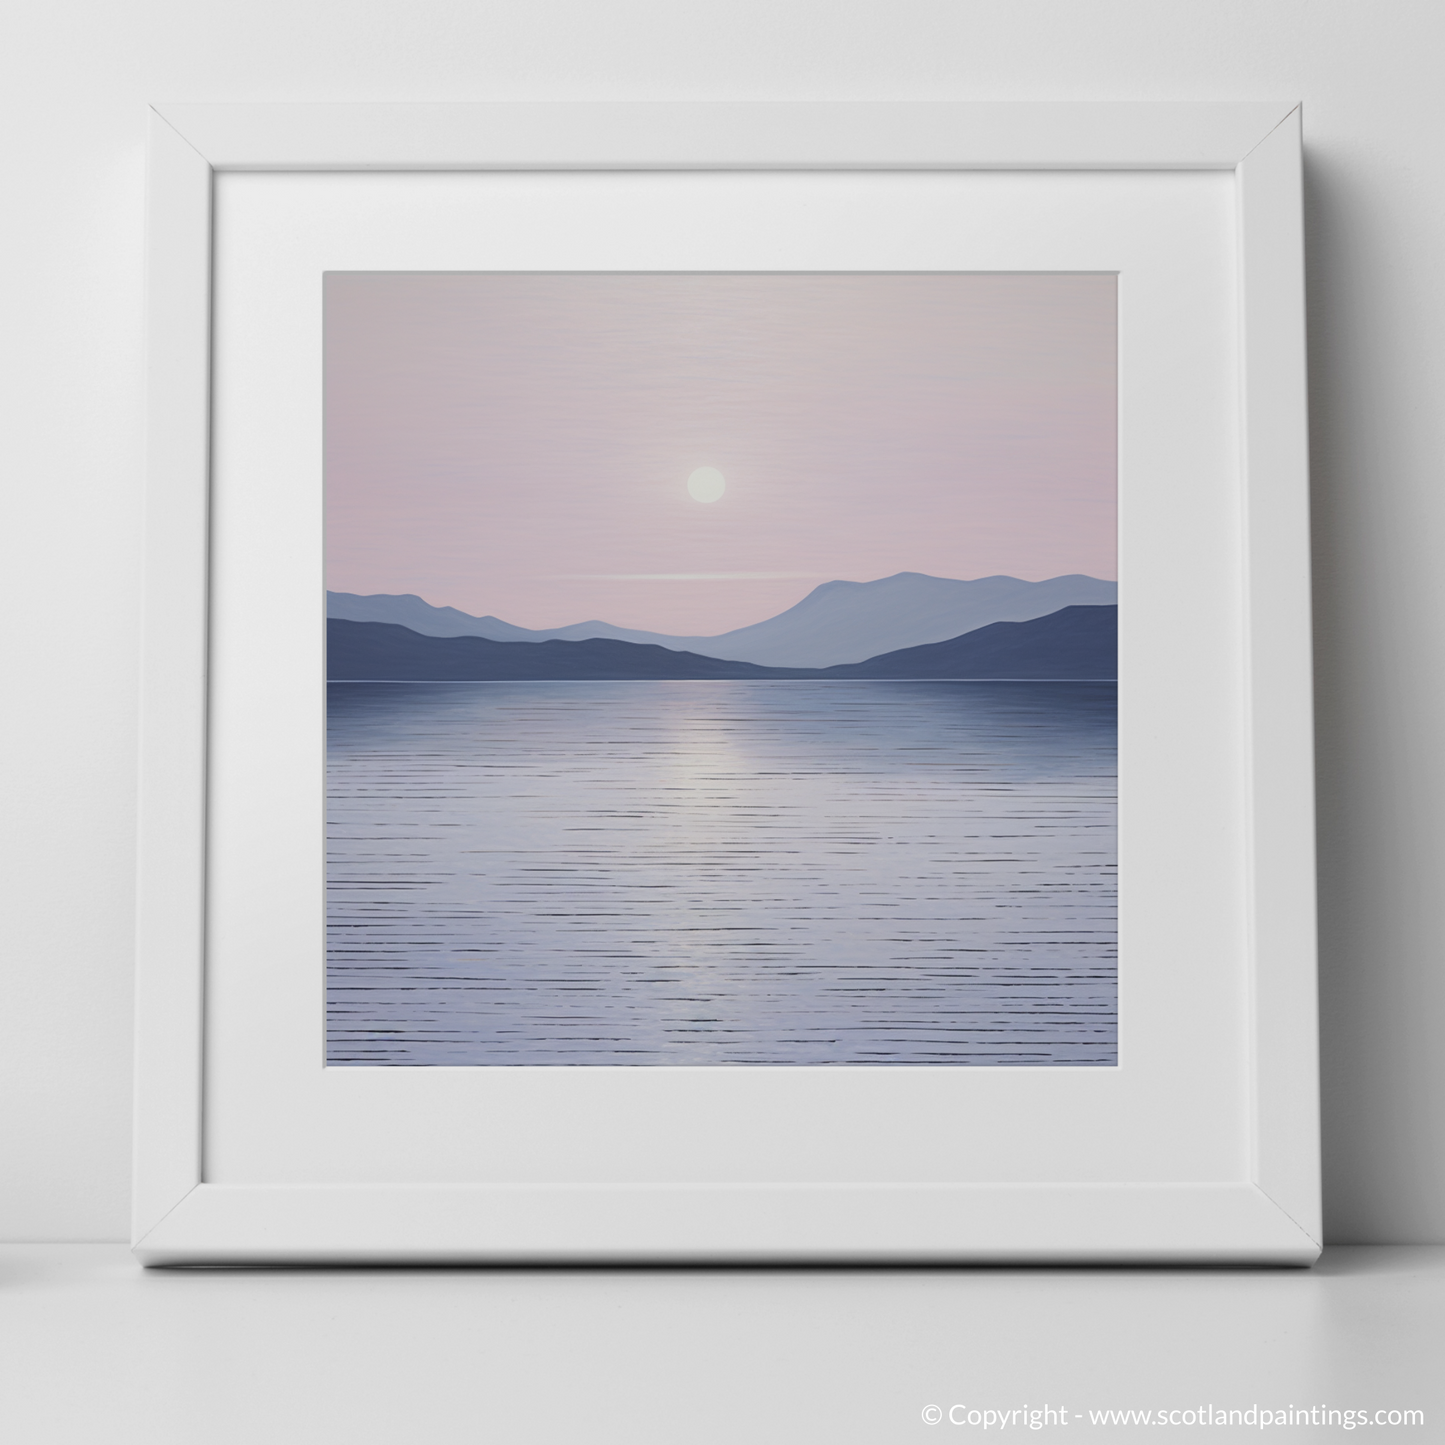 Art Print of Dusk on Loch Lomond with a white frame